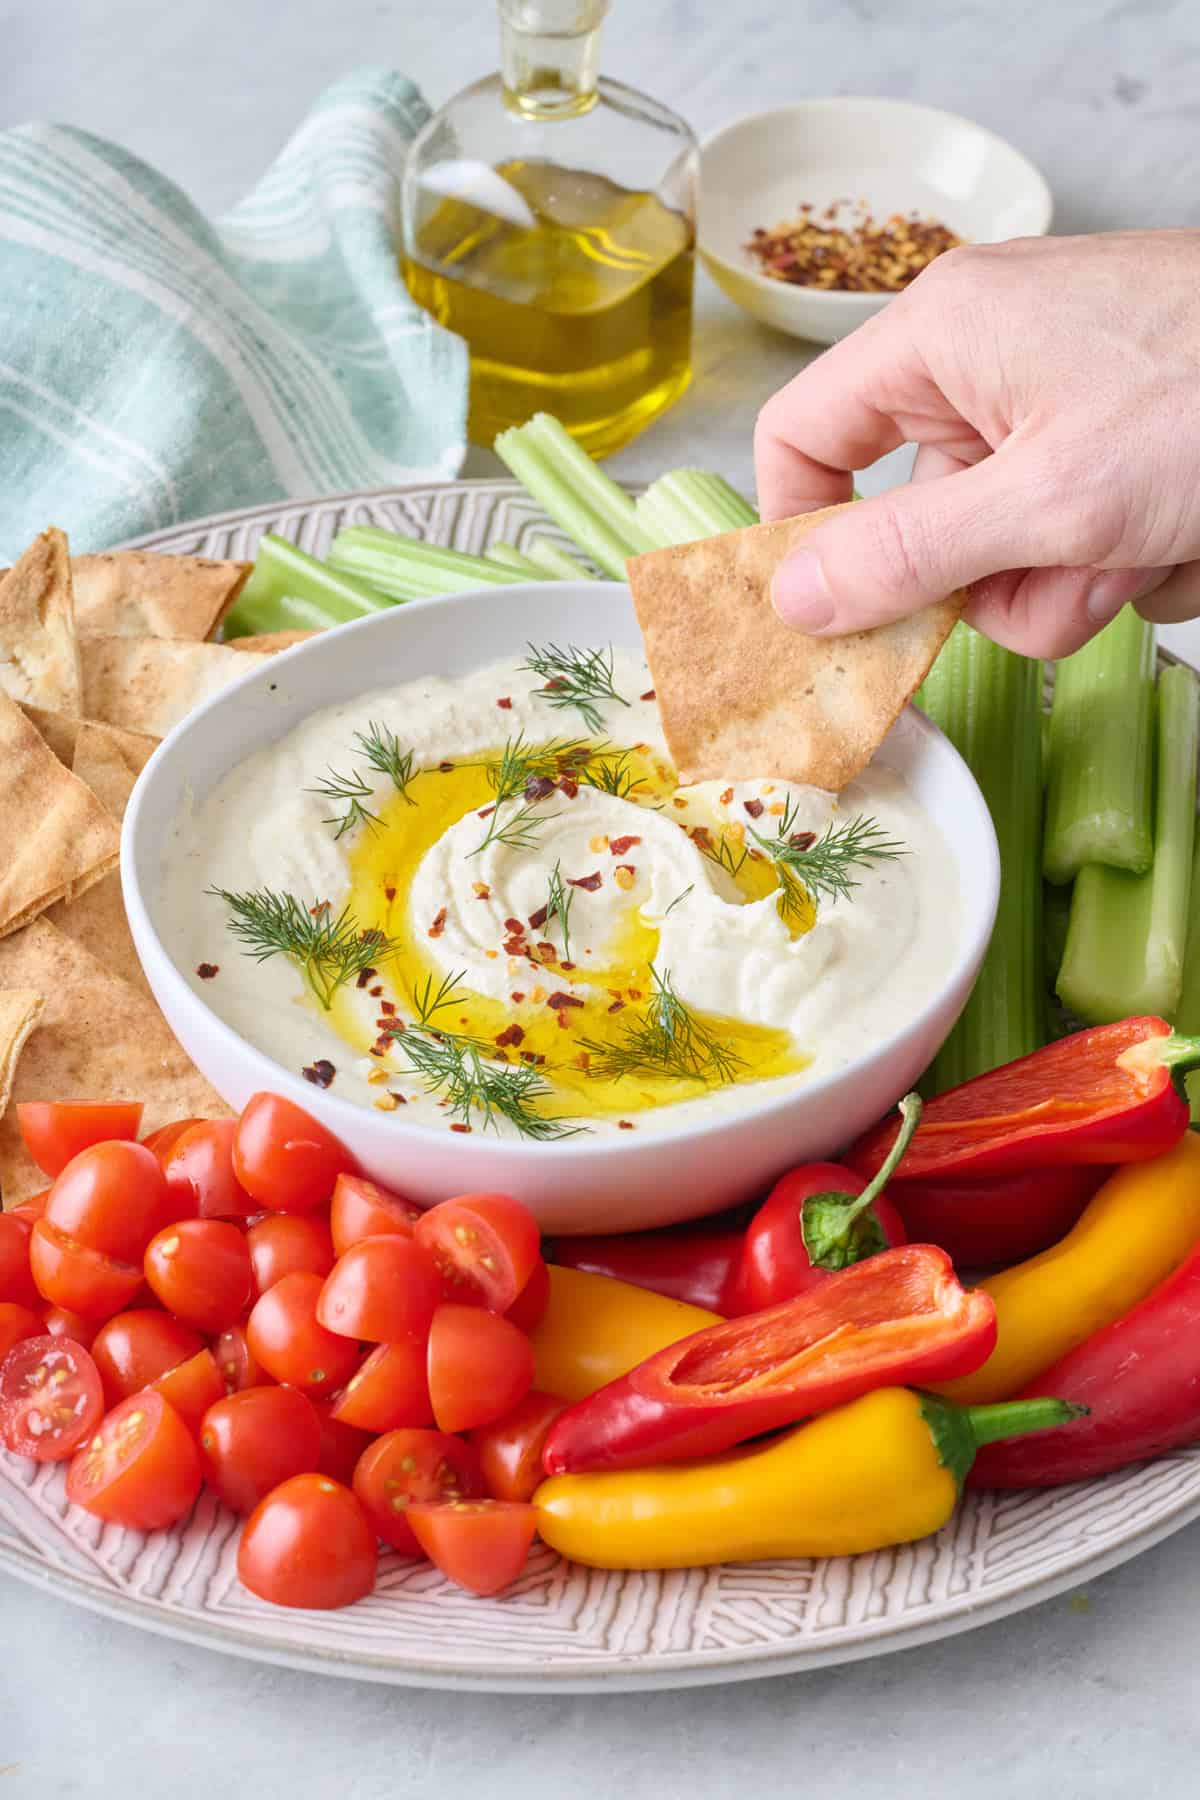 Hand dipping a pita chip into feta dip surrounded by veggies.